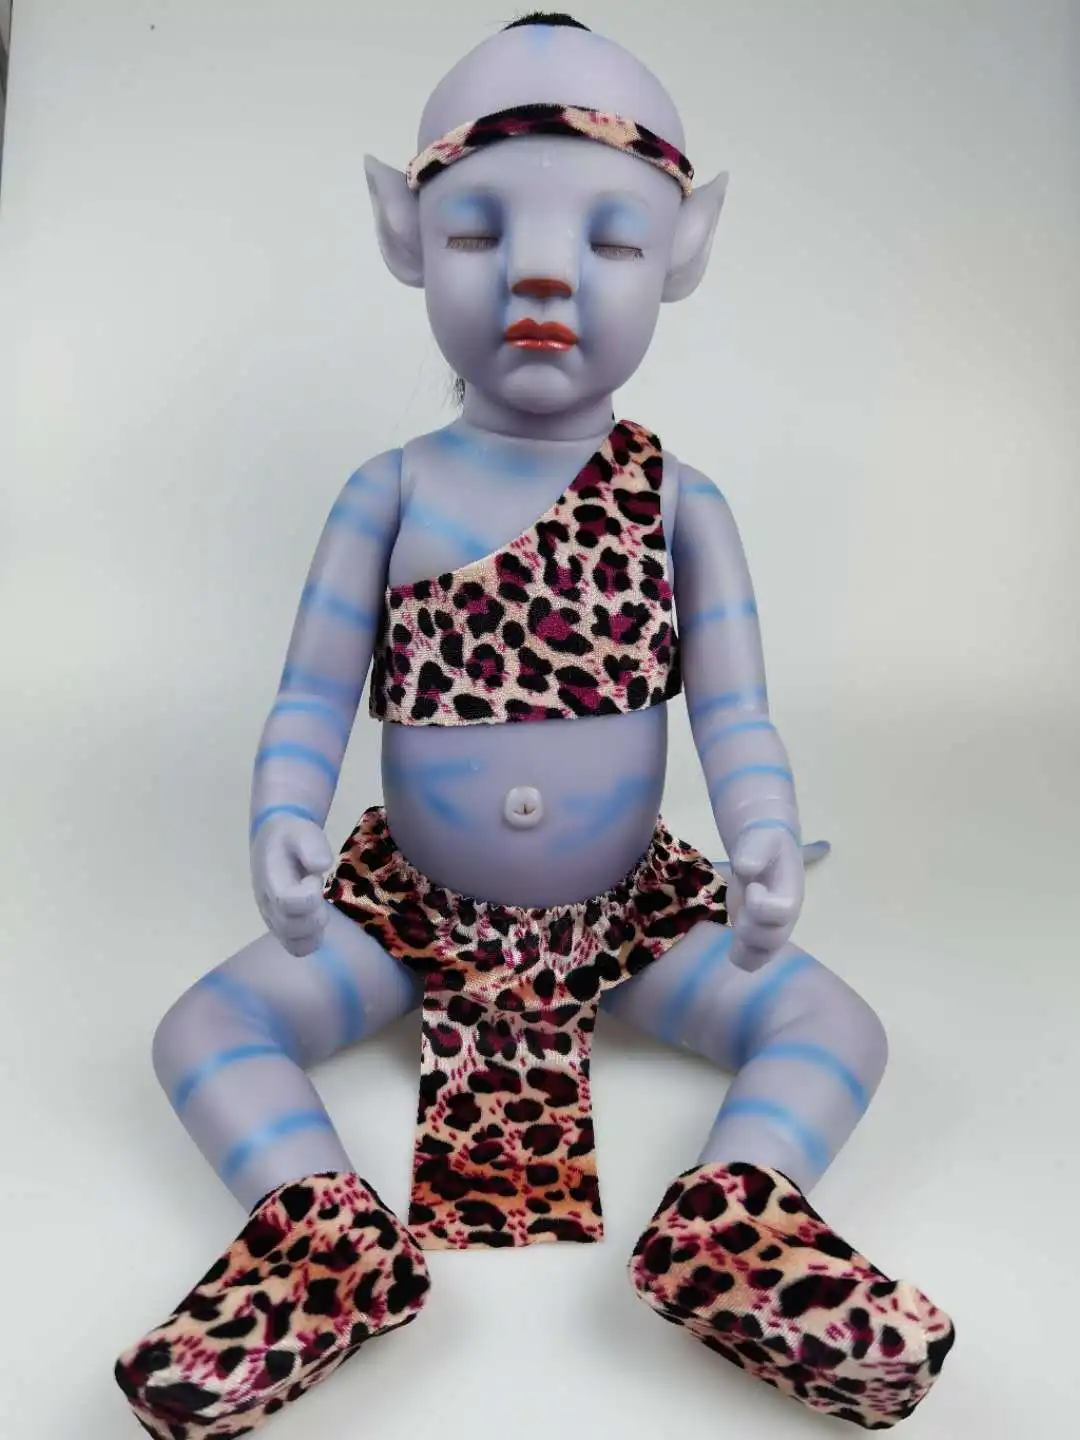 
Realistic Soft Silicone Reborn dolls The Blue bebes reborn toys for baby 